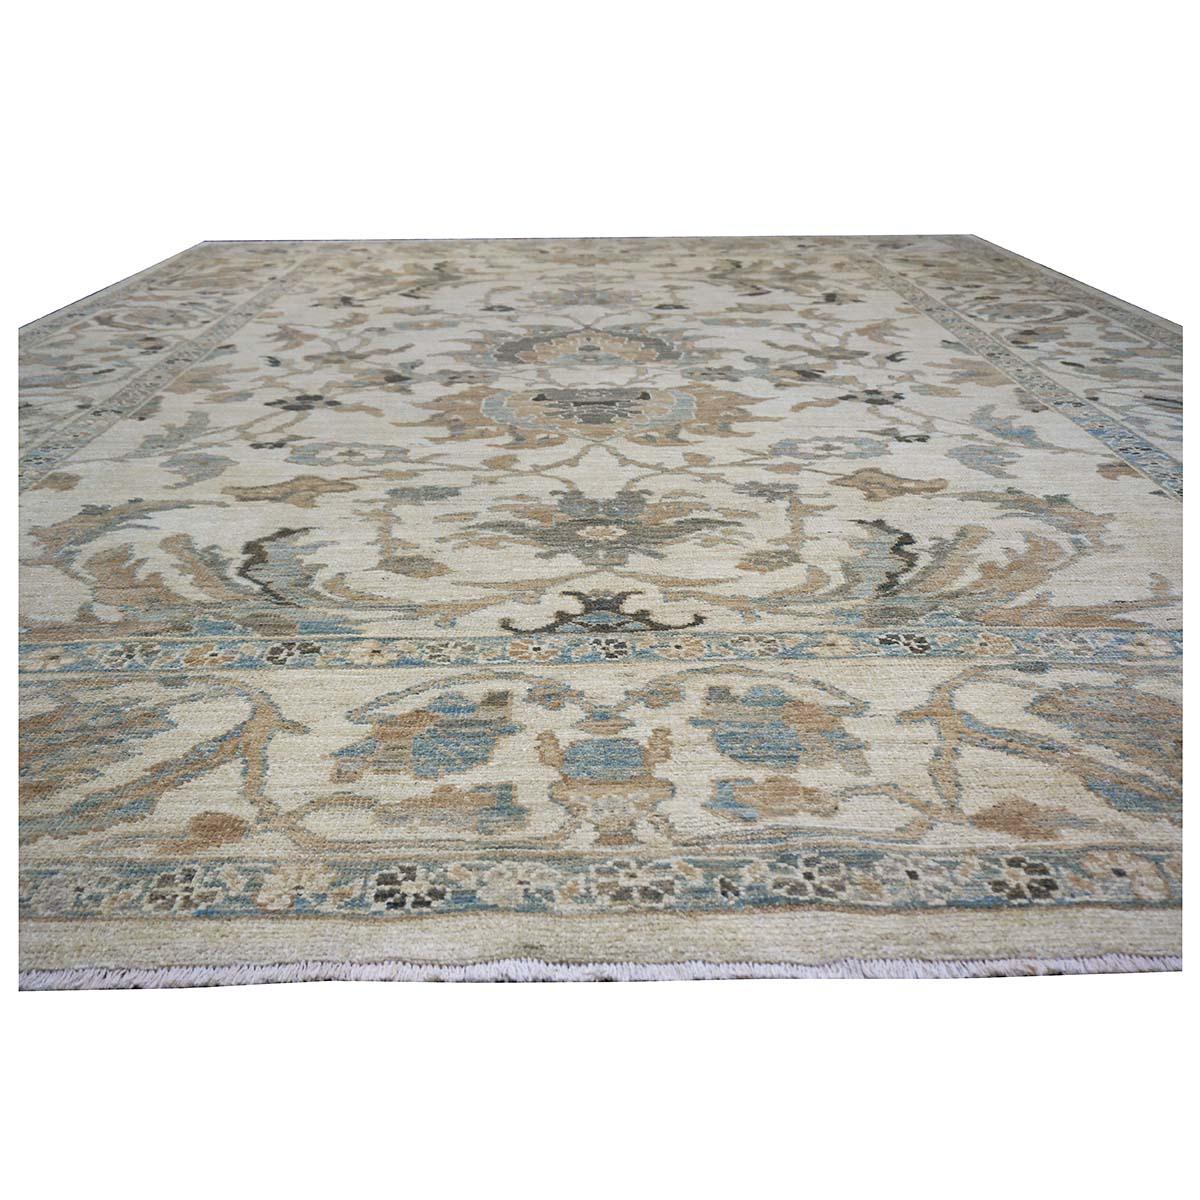 21st Century Persian Sultanabad 9x11 Ivory, Light Blue, & Tan Handmade Area Rug In Excellent Condition For Sale In Houston, TX